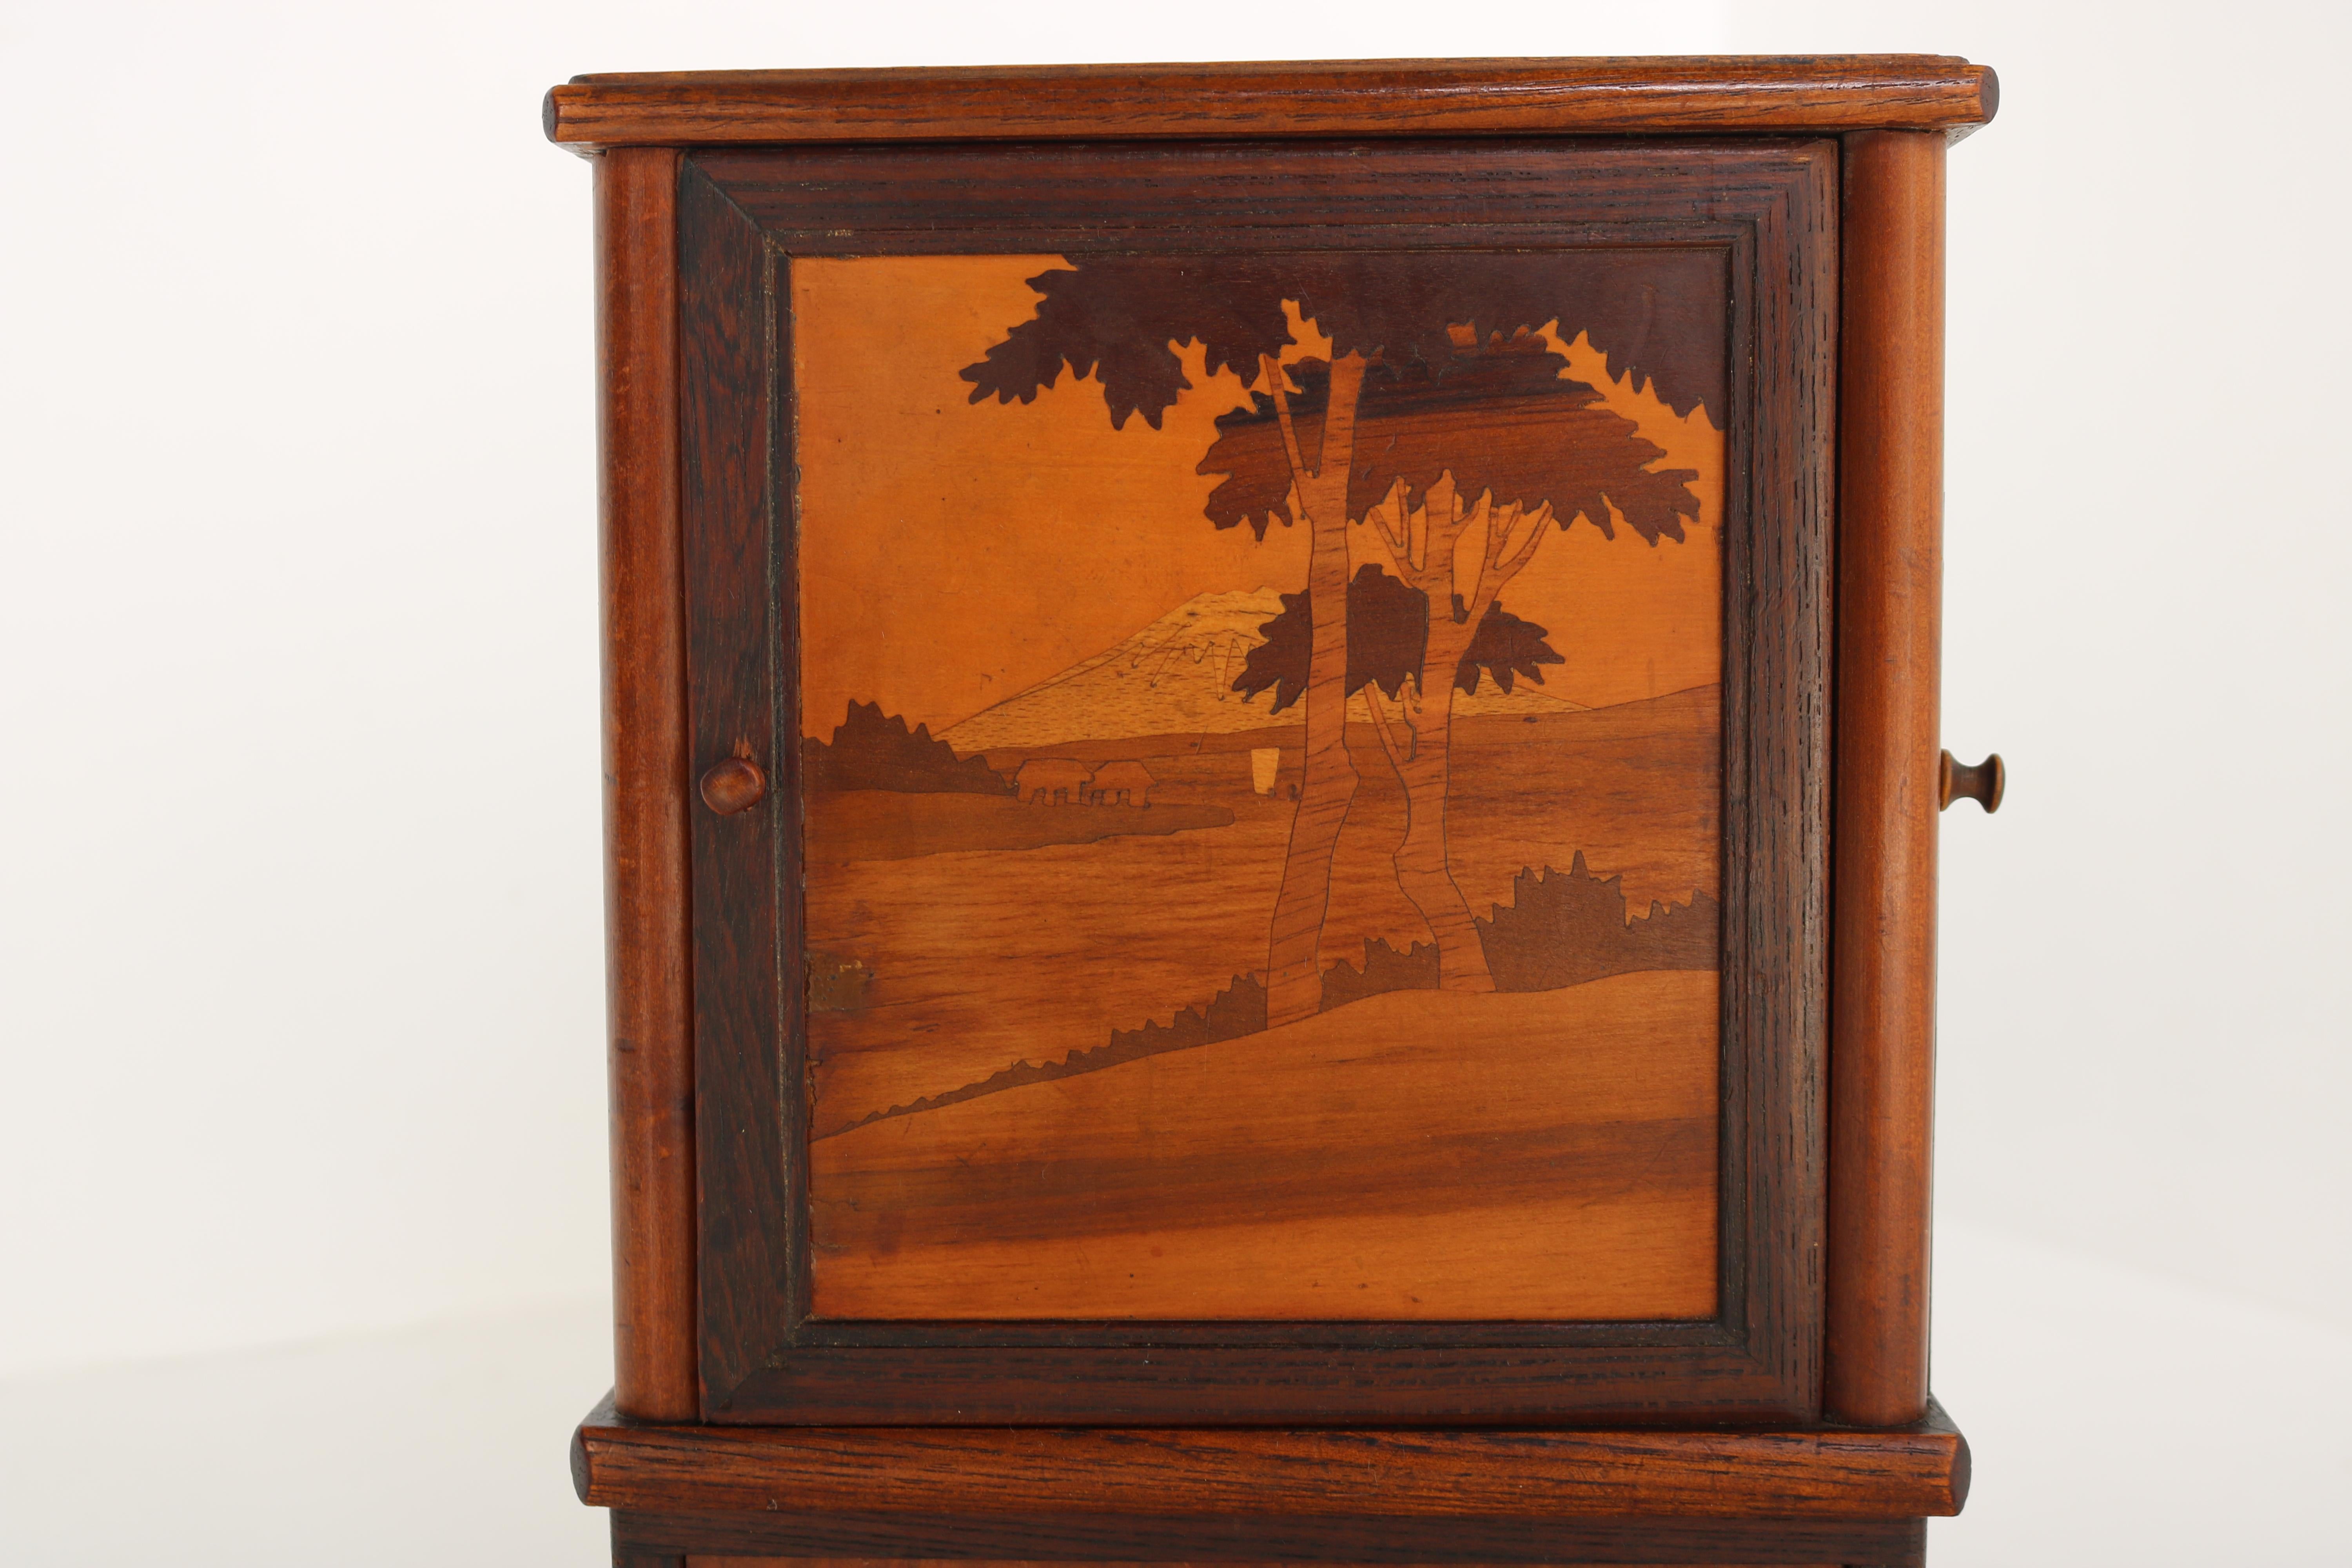 Lovely antique French cigar box / cigarette cabinet from 1900. with various inlaid woods. Gorgeous craftsmanship 
The cabinet is decorated with landscapes , mountains , trees , boats , animals & rivers. all done by hand with great details & colors.